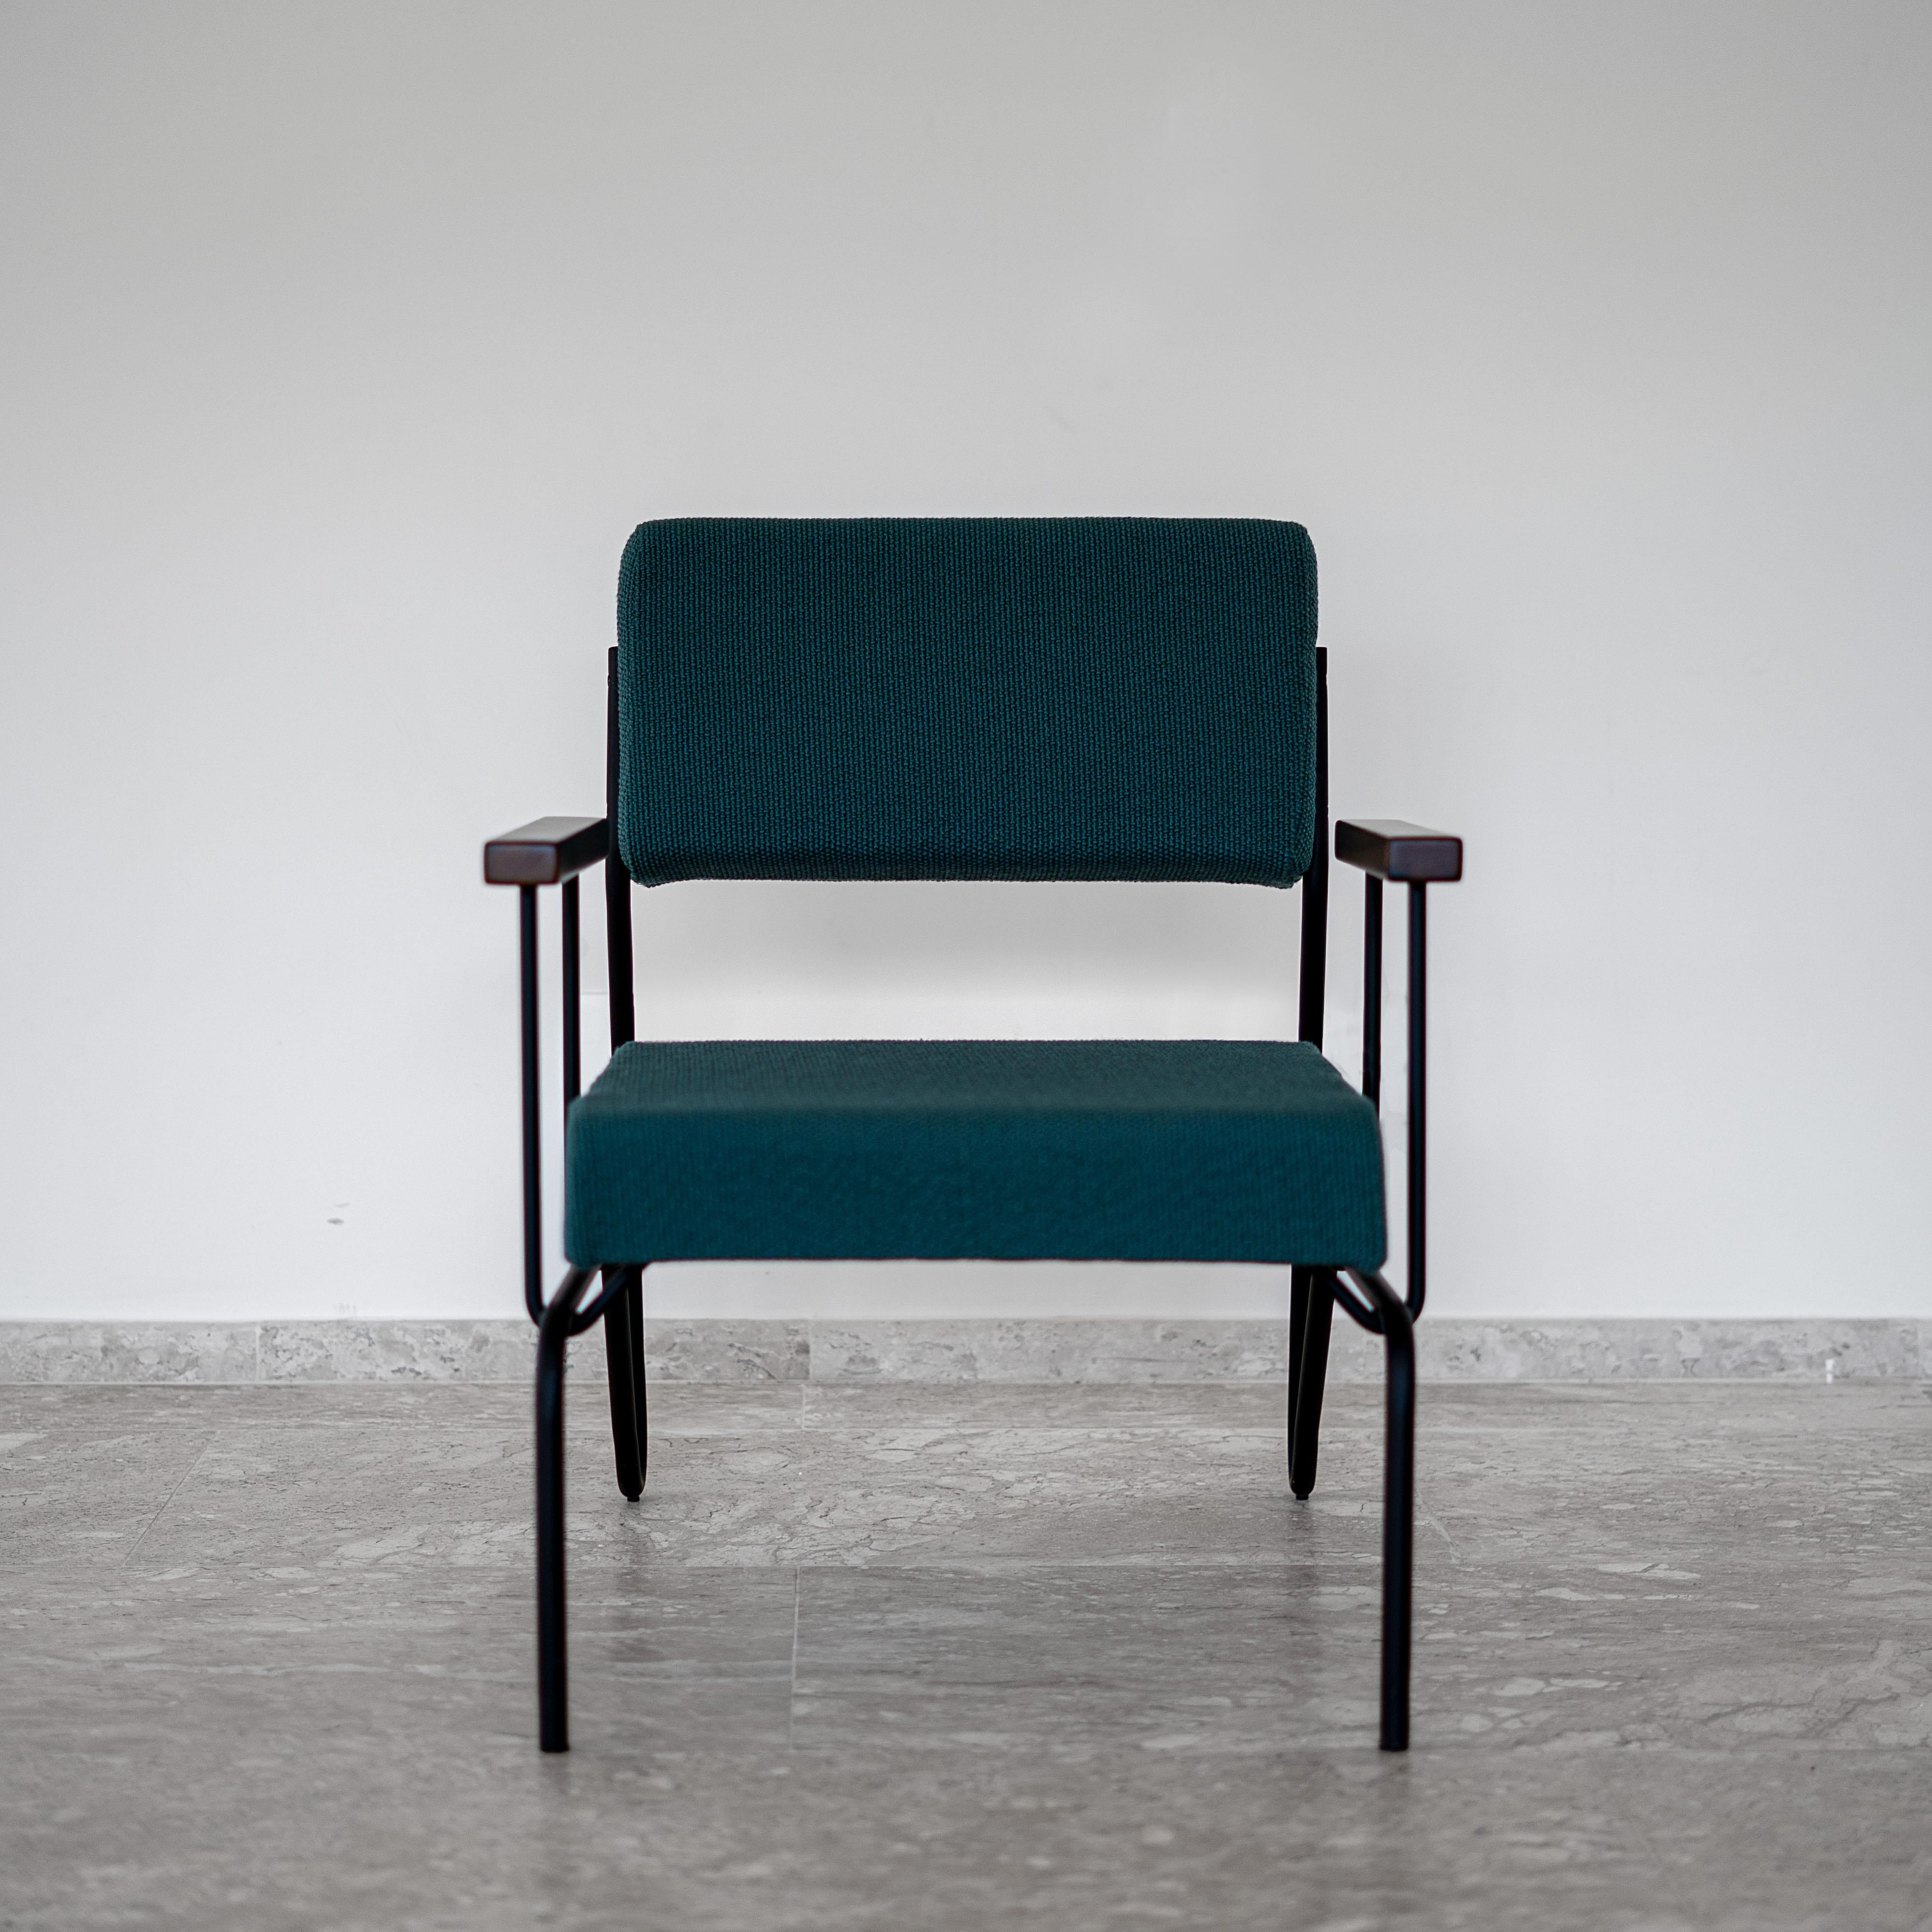 This award winning minimalist armchair in steel, solid wood and leather is designed with a Classic and geometric reasoning. 
The continuity of the structural lines suggests fluidity. The backrest allows a smooth movement and just like the seat, it